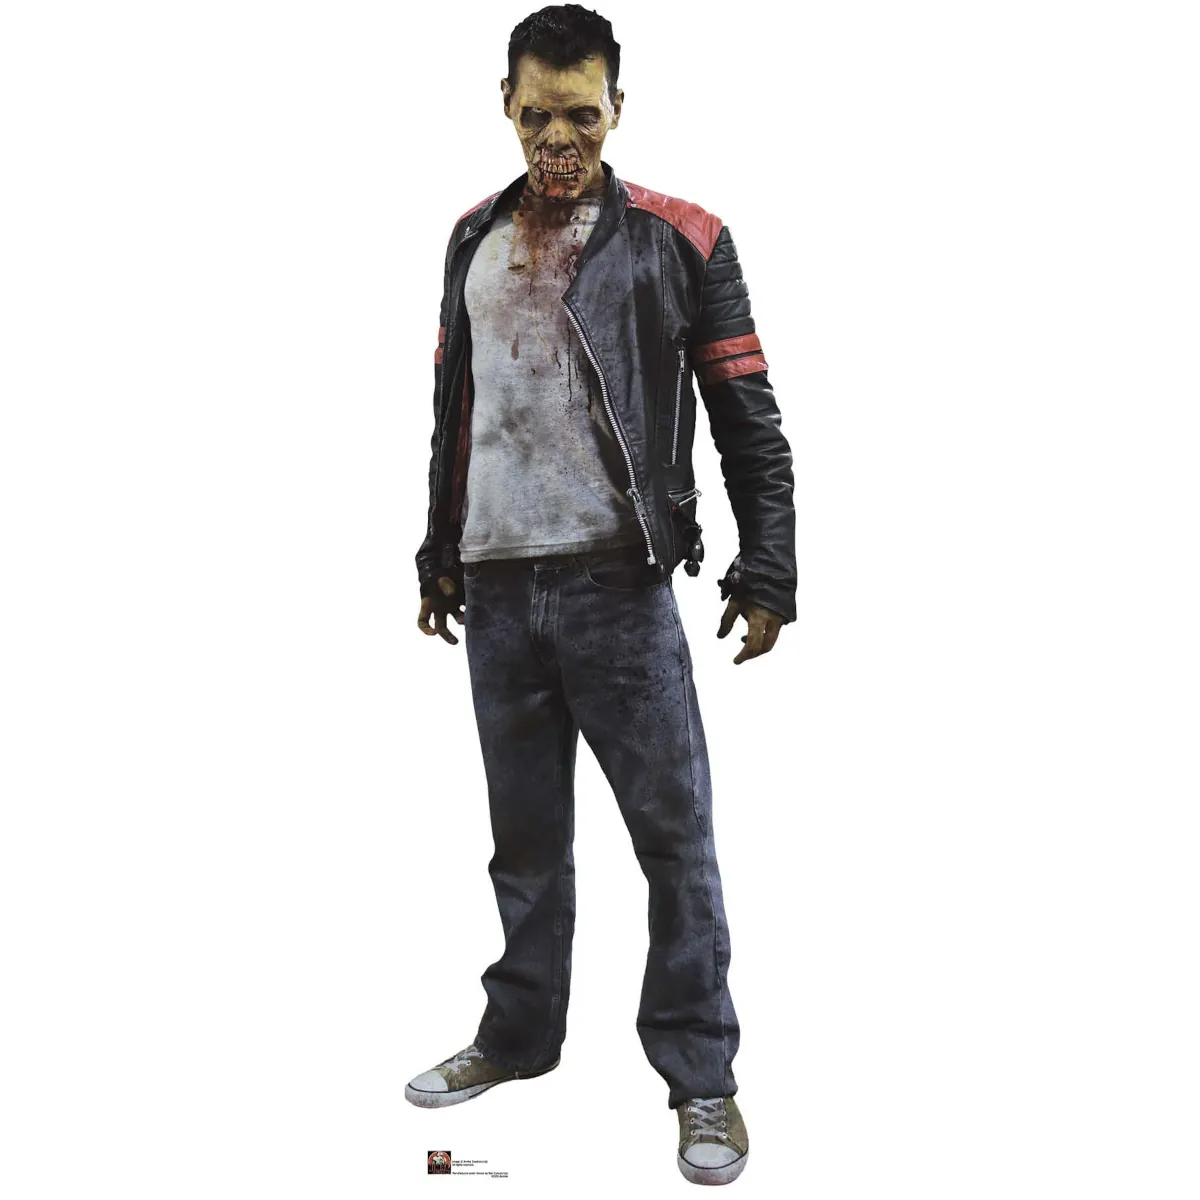 SC359 Zombie 'The Biter' (Halloween) Lifesize Cardboard Cutout Standee Front